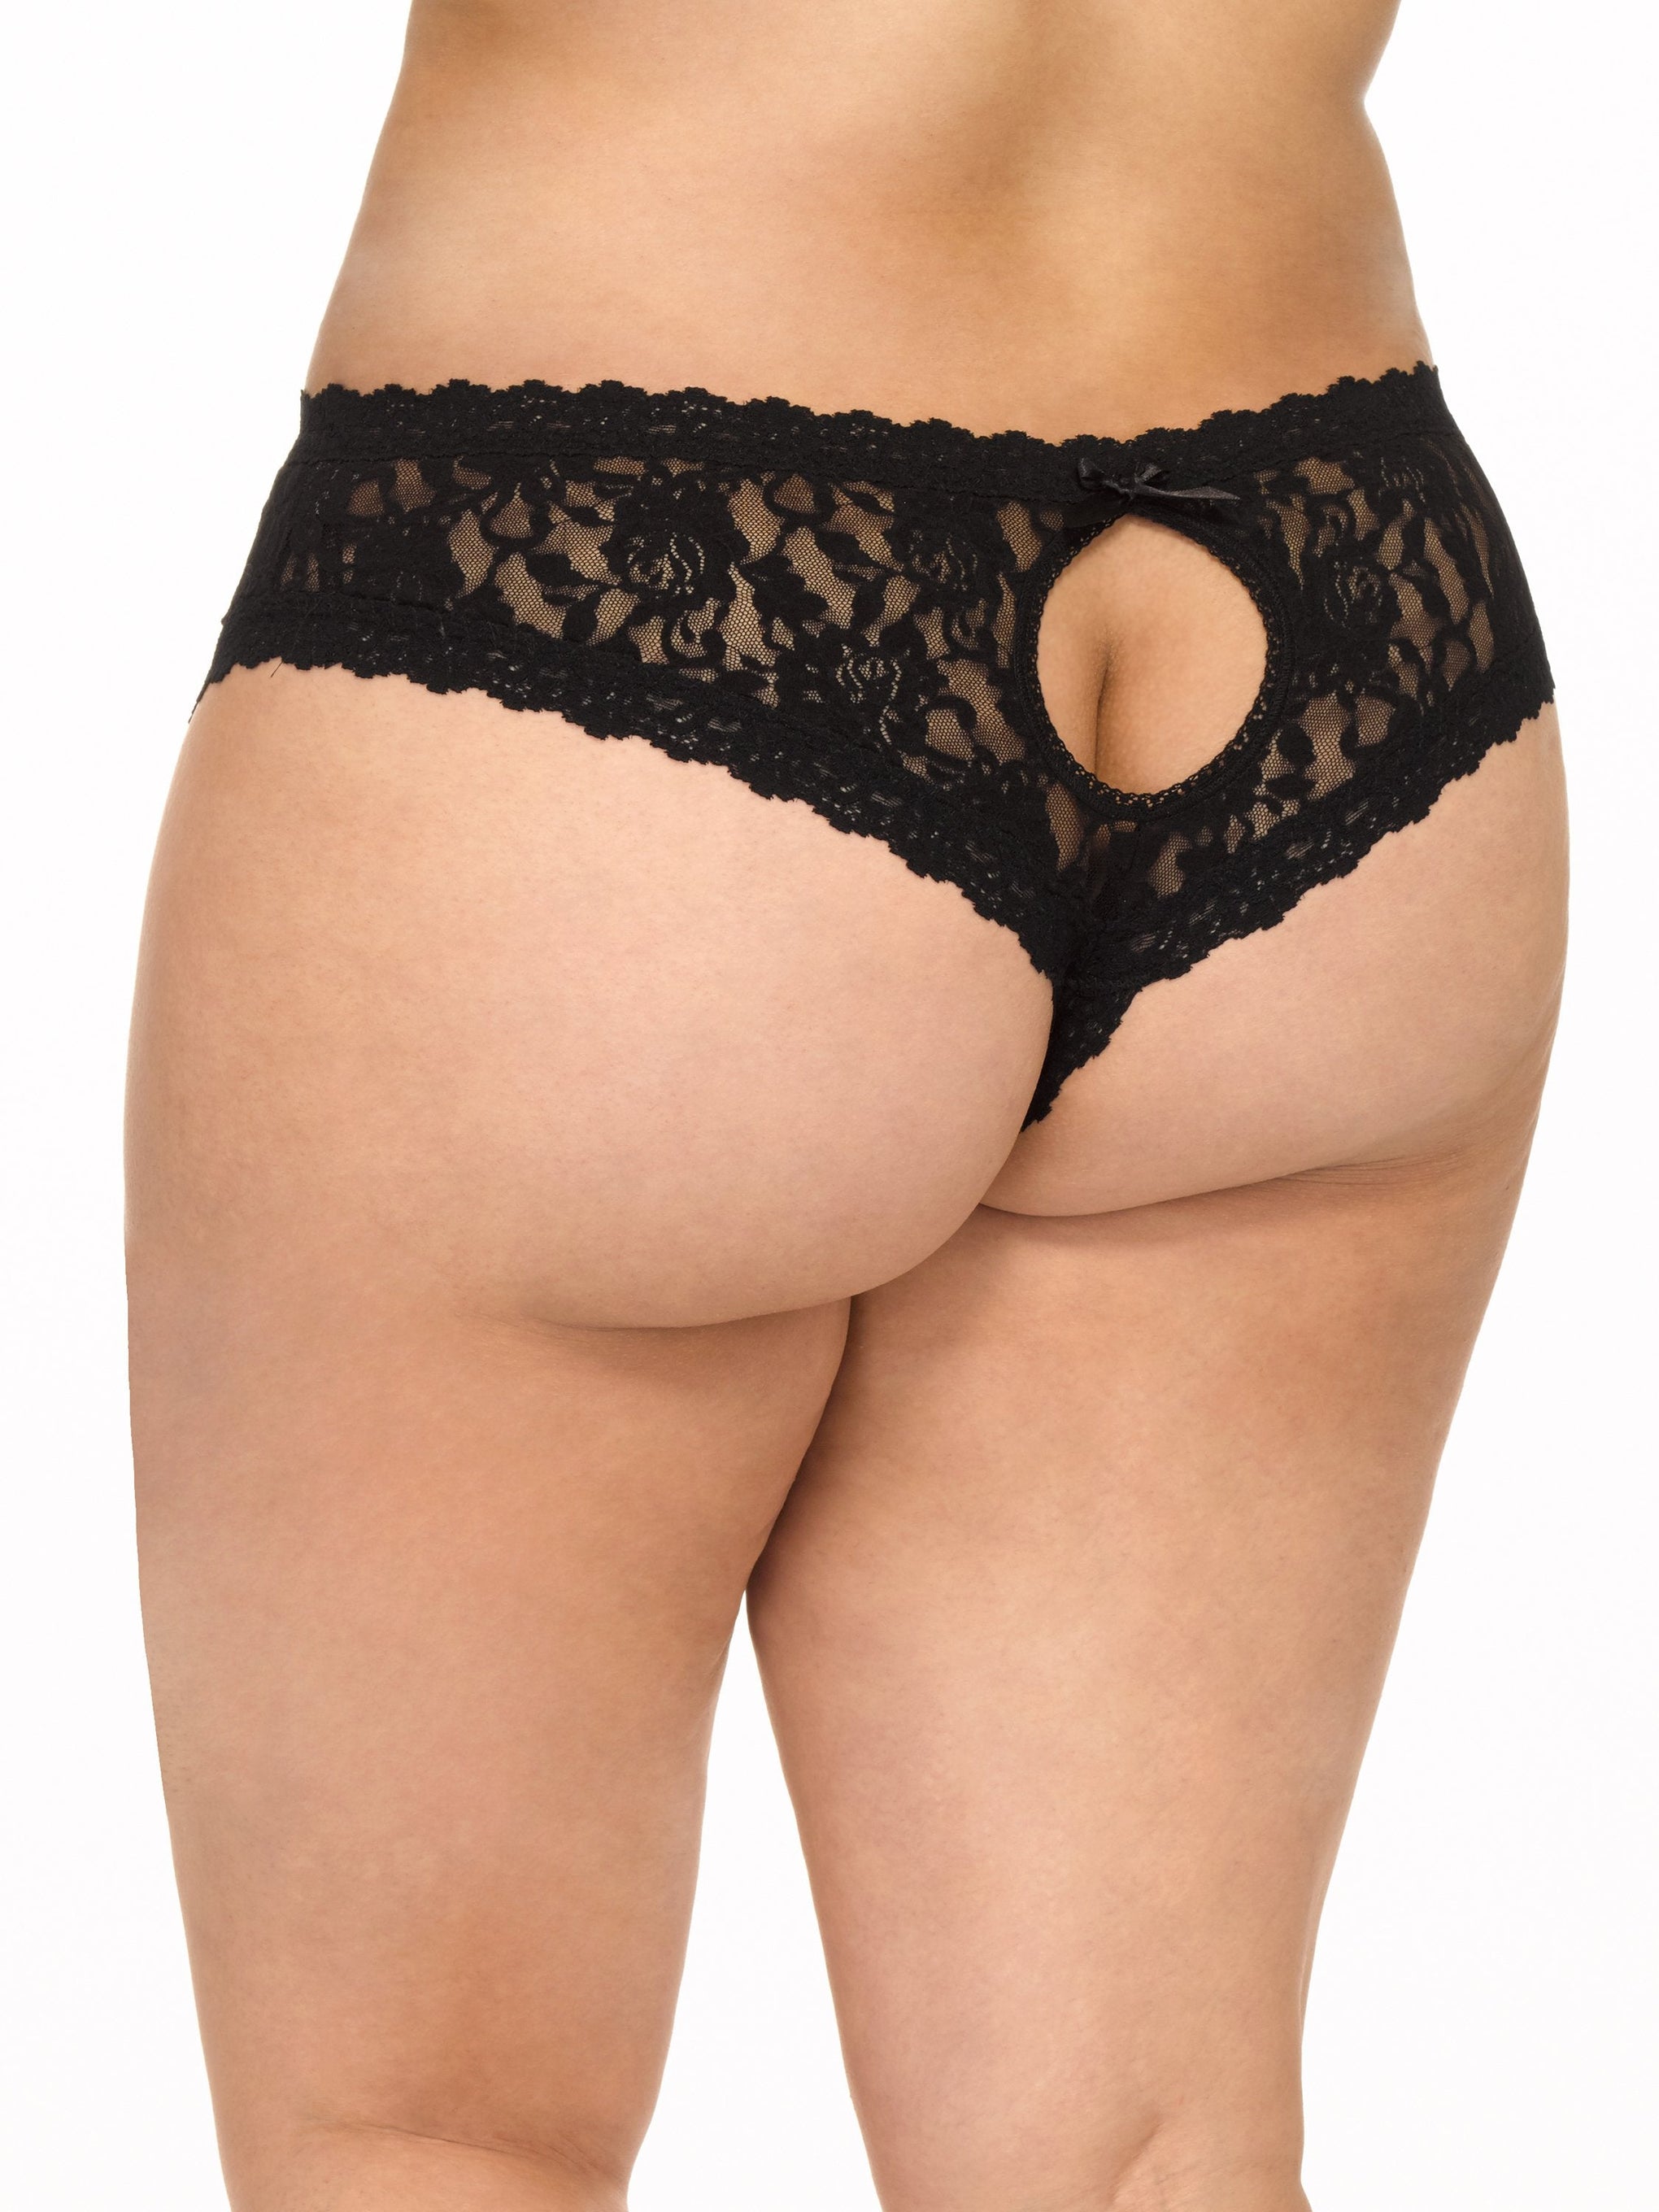 https://www.hankypanky.com/cdn/shop/files/Hanky-Panky-Plus-Size-Signature-Lace-Crotchless-Cheeky-Hipster-View-2.jpg?v=1700163856&width=2040